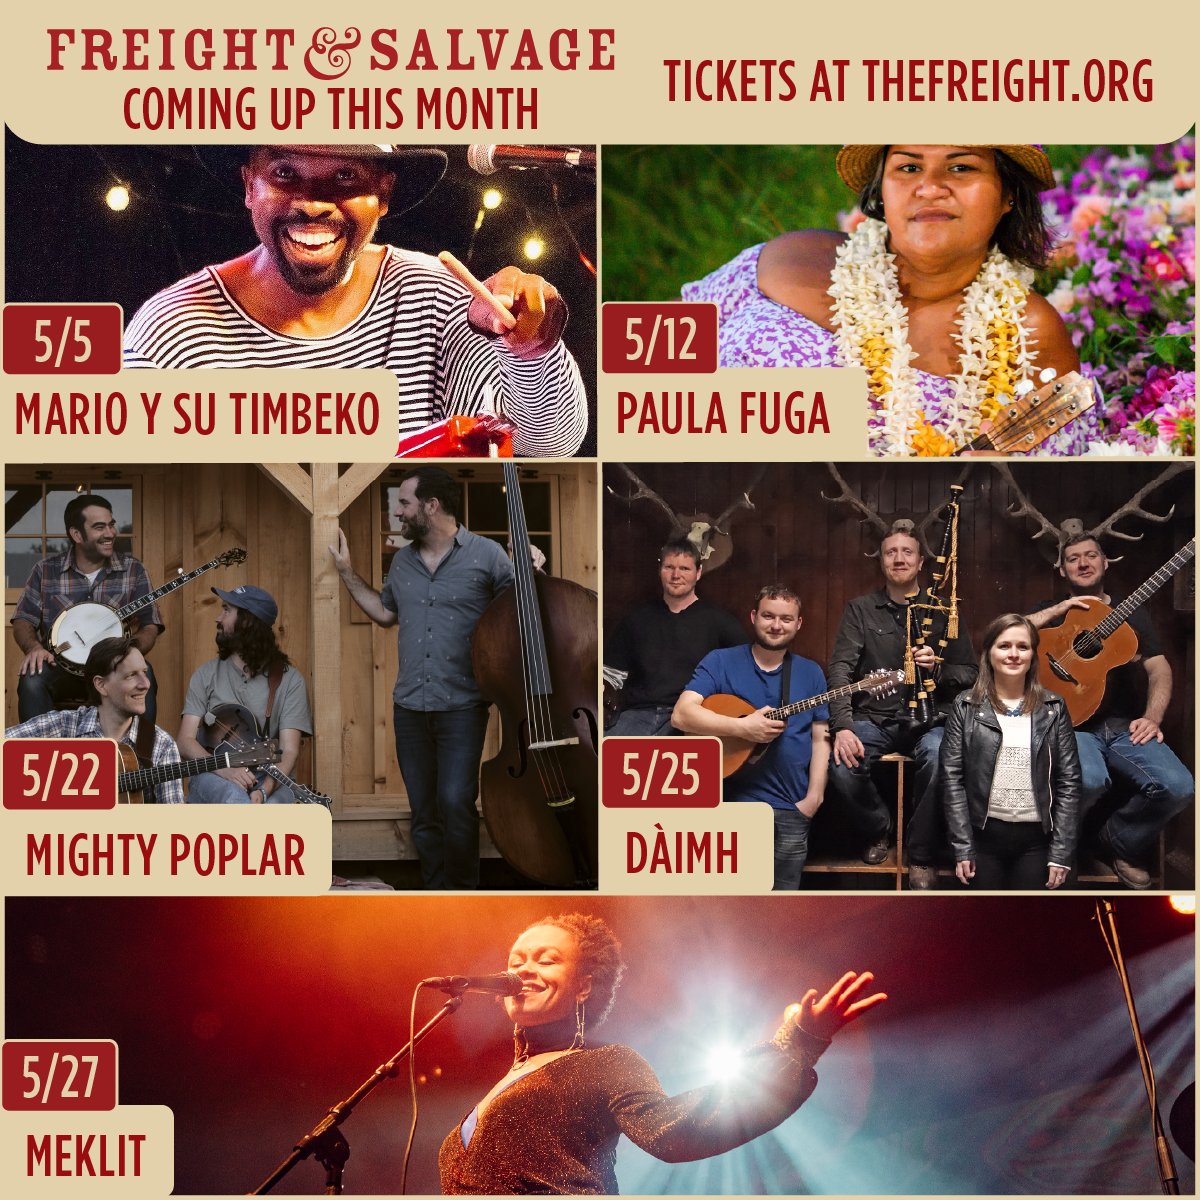 From bluegrass to Hawaiian to jazz, Freight & Salvage has your concert plans covered all month long 🎶 See the full calendar + win tickets: dothebay.com/venues/freight…